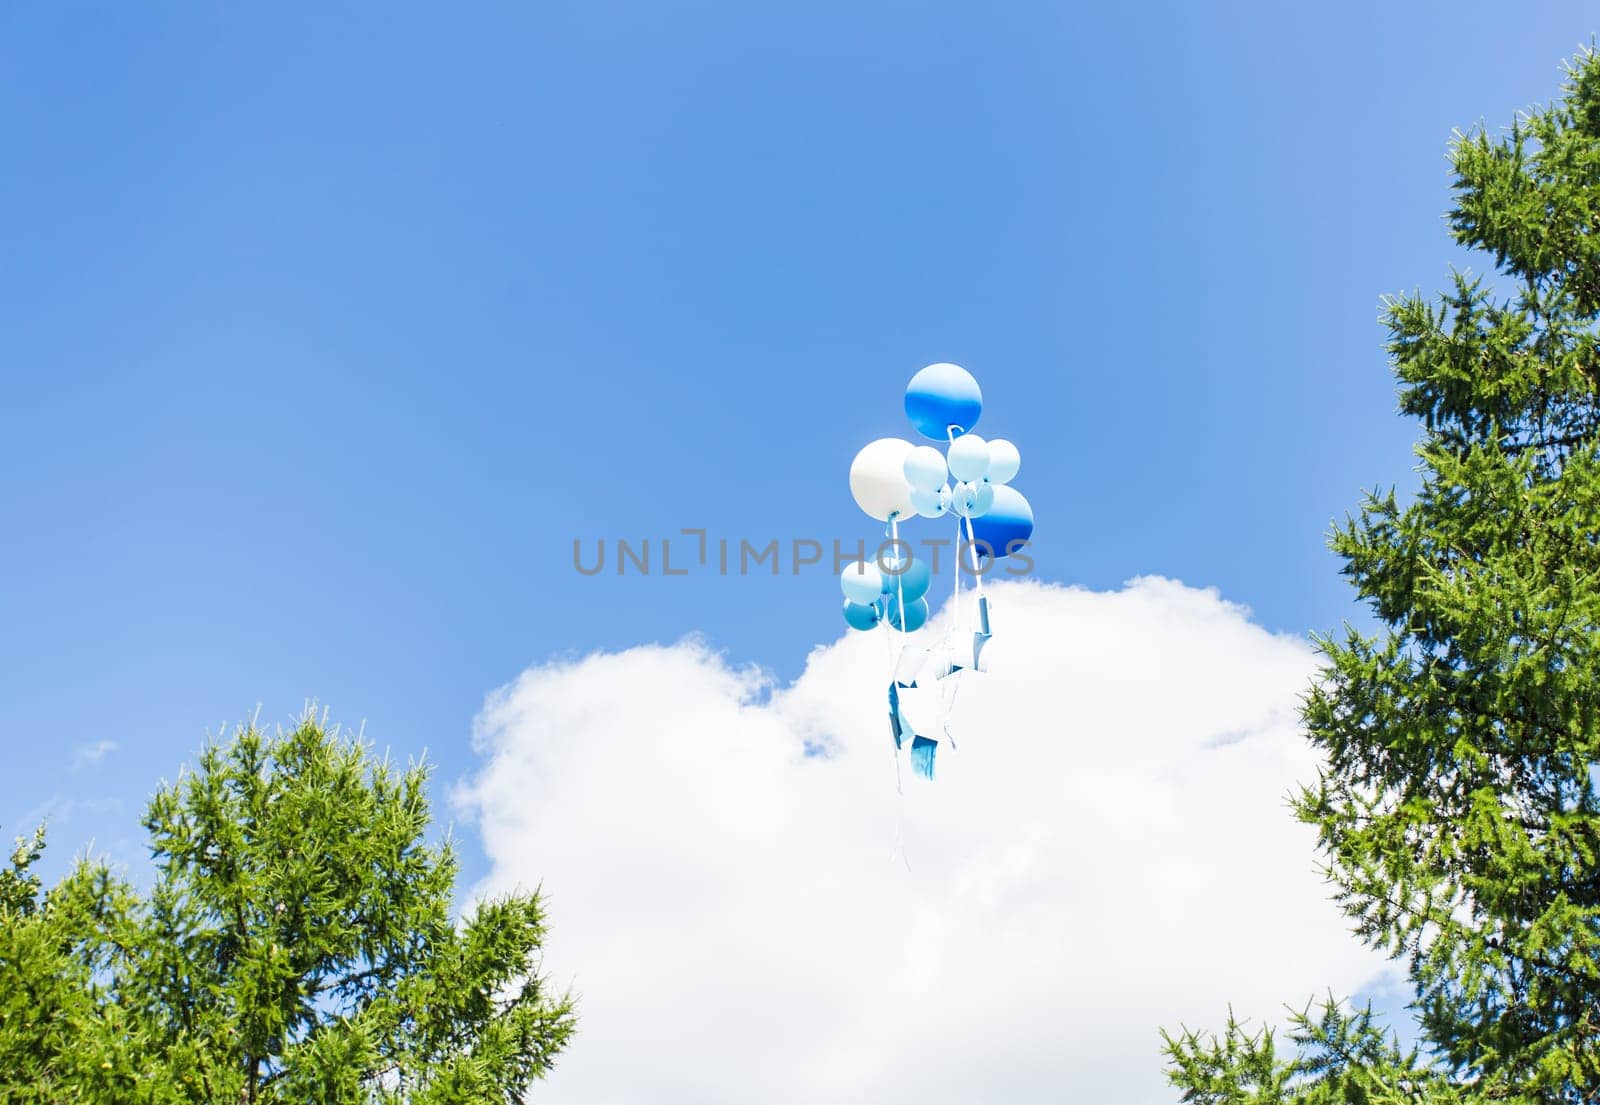 multicolored balloons flying in the blue sky